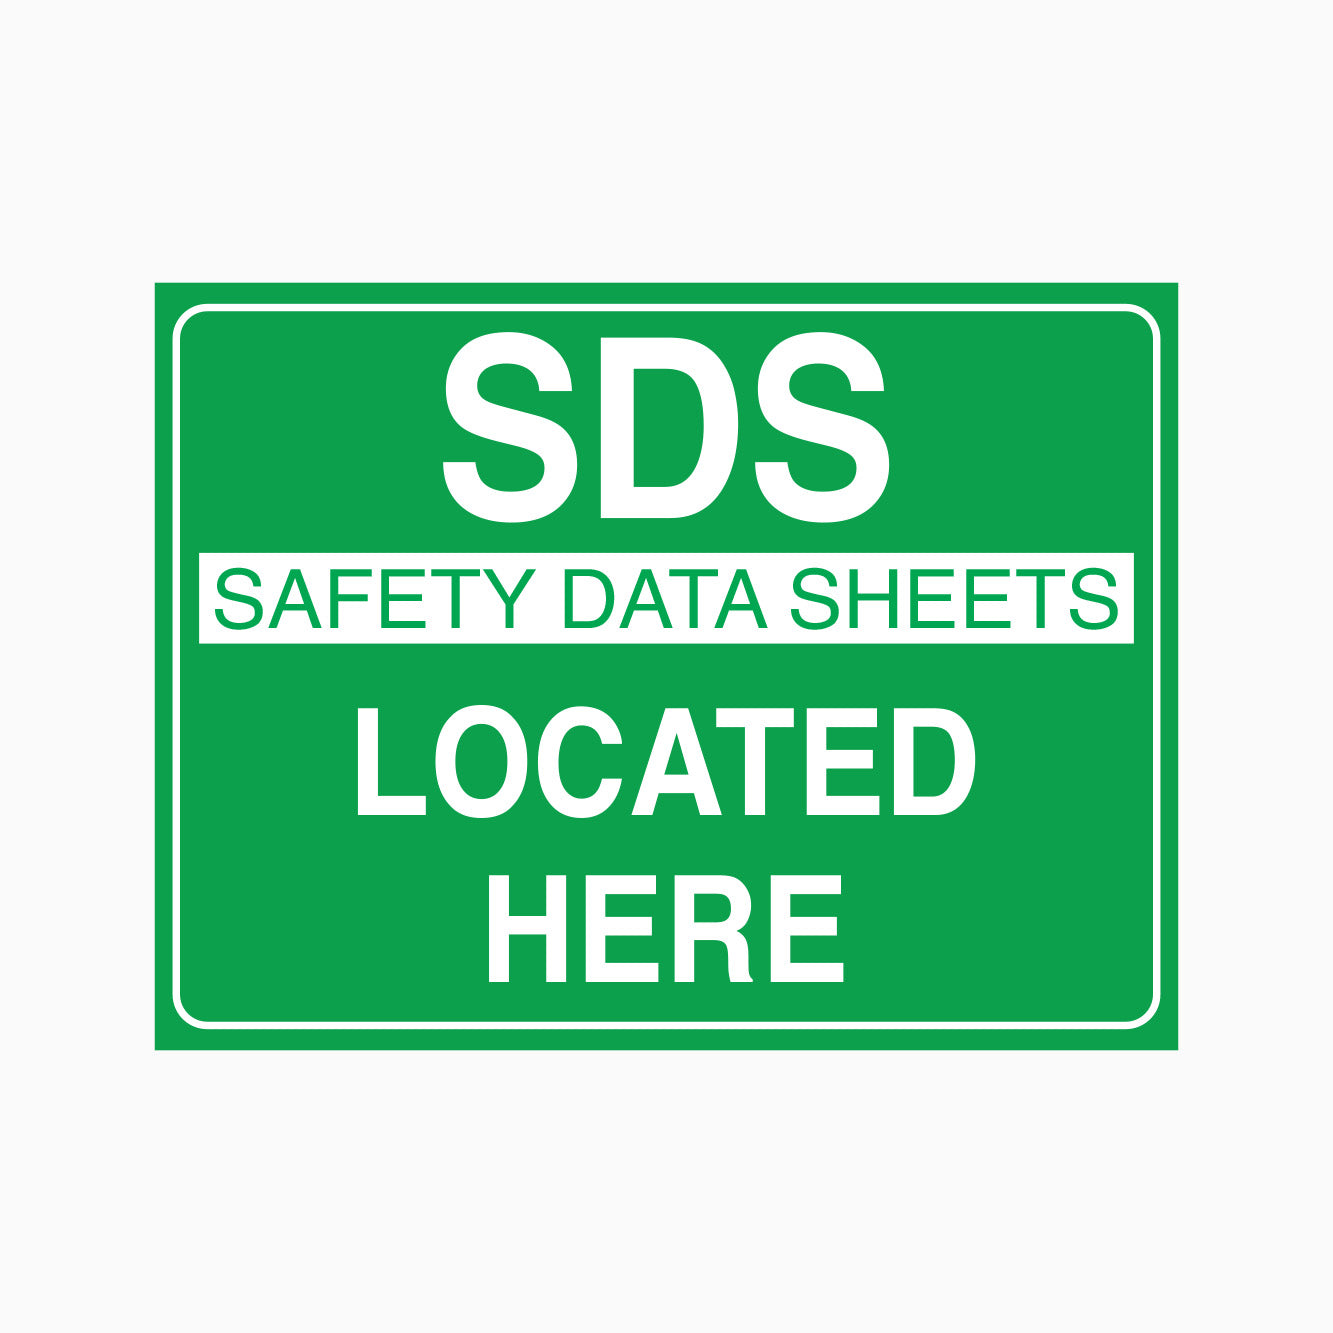 SDS SAFETY DATA SHEETS LOCATED HERE SIGN